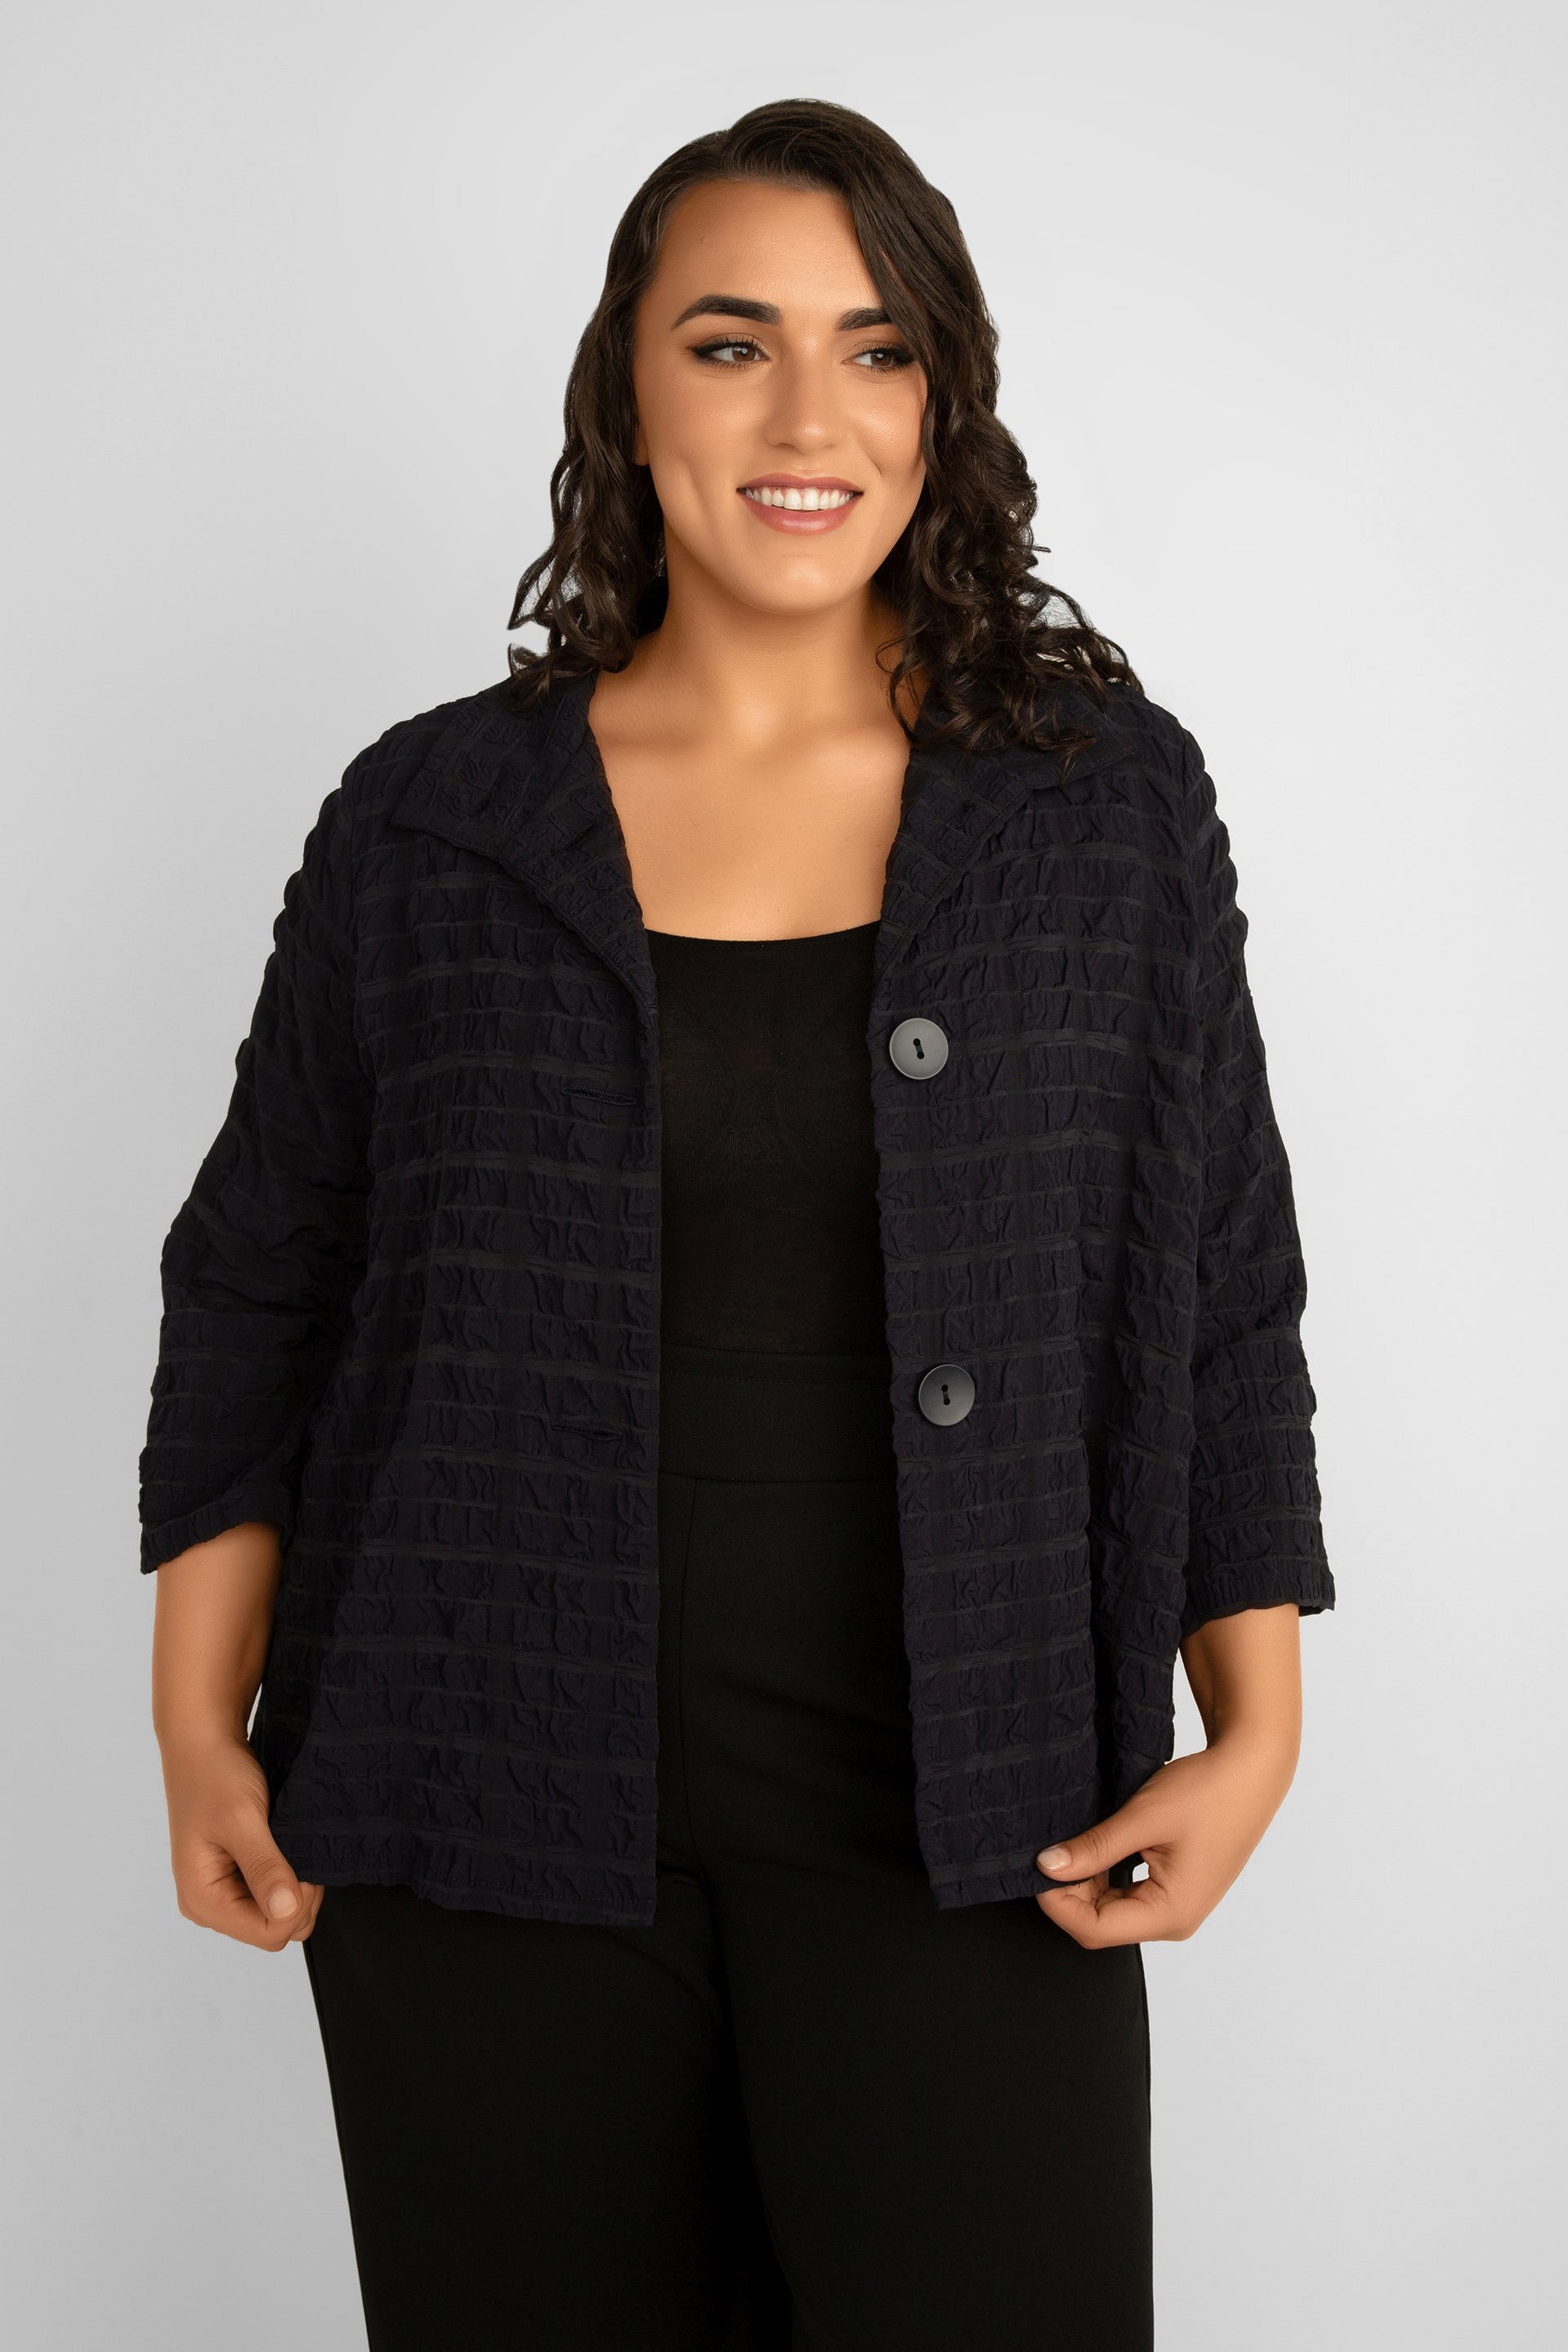 Joseph Ribkoff (241069) Women's 3/4 Sleeve Textured Woven Office Jacket with Stand Collar & Button Front in Navy